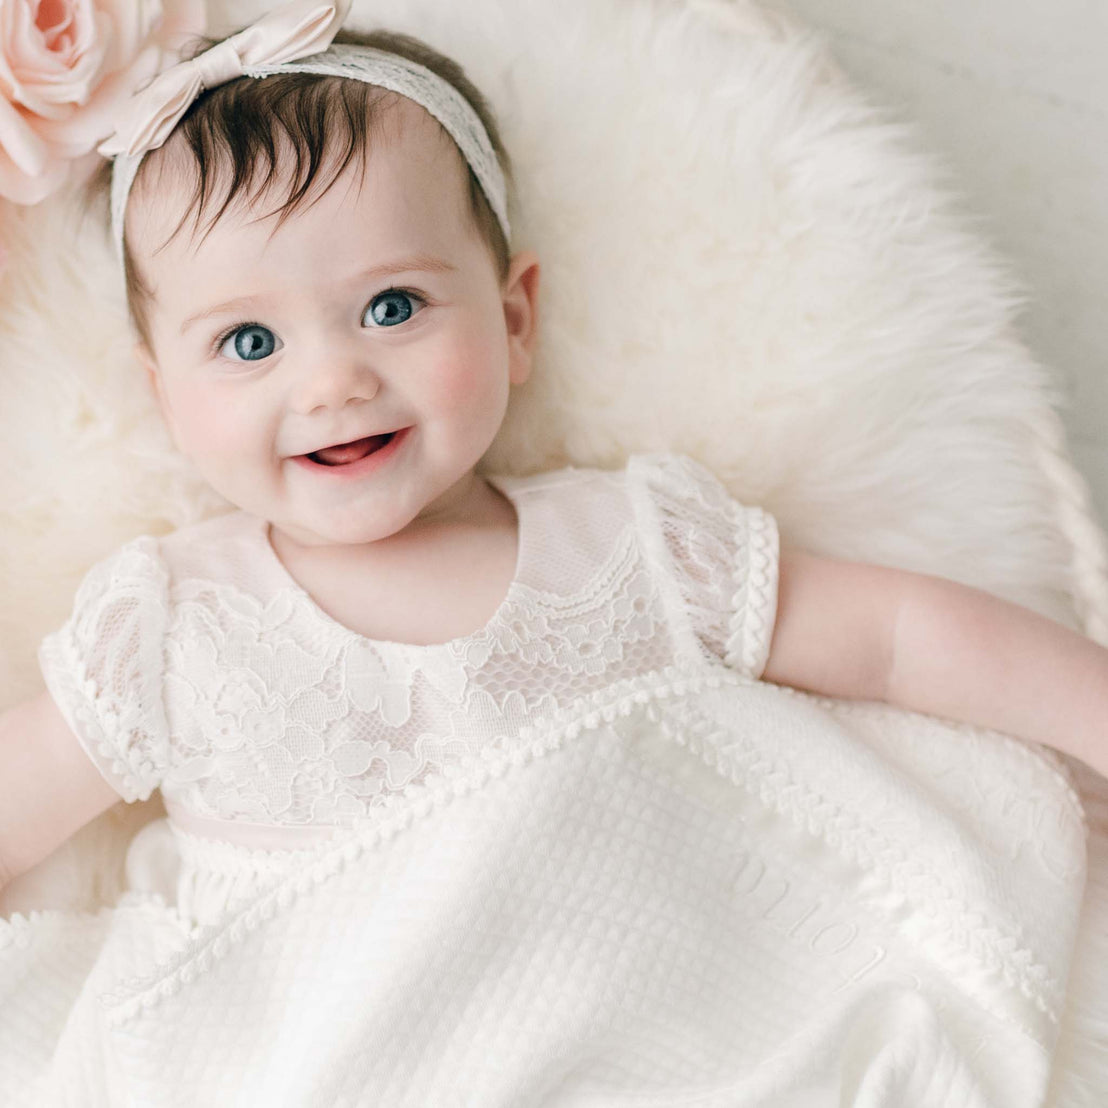 Baby girl laughing wearing the Victoria cotton layette gown, snuggled in the personalized Victoria christening blanket made of quilted cotton.